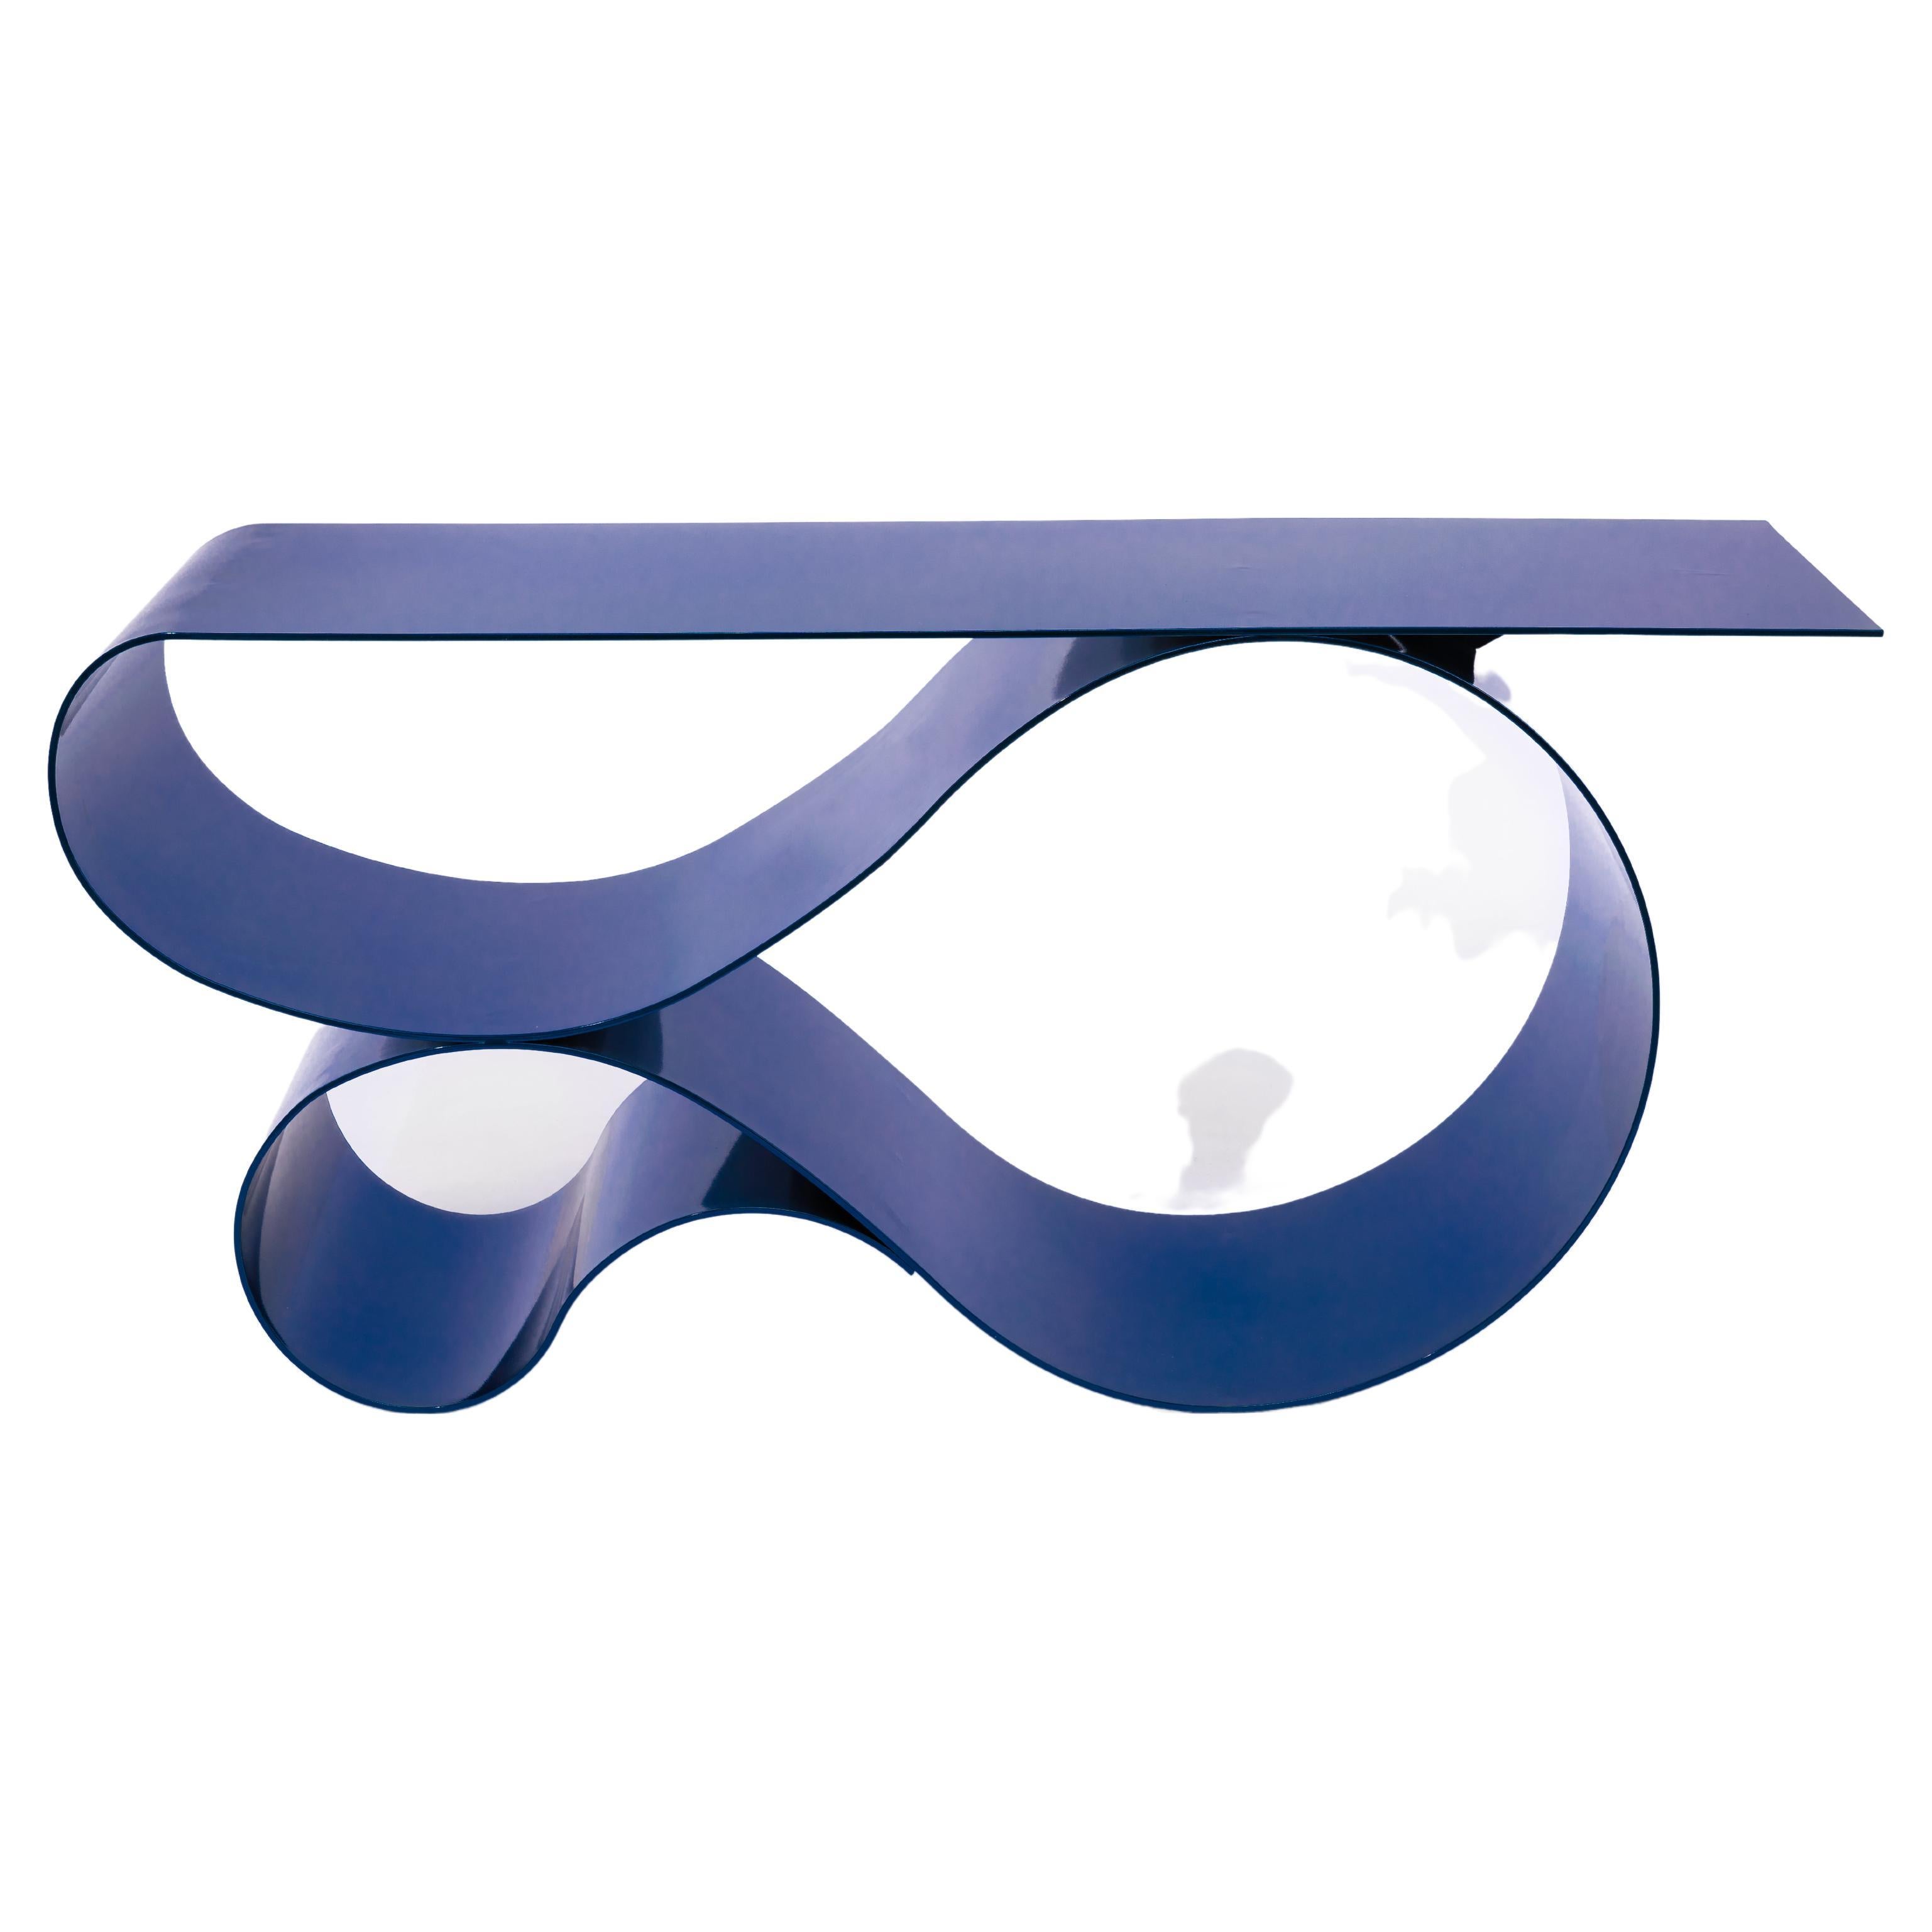 Whorl Console in Blue Powder Coated Aluminum by Neal Aronowitz Design For Sale